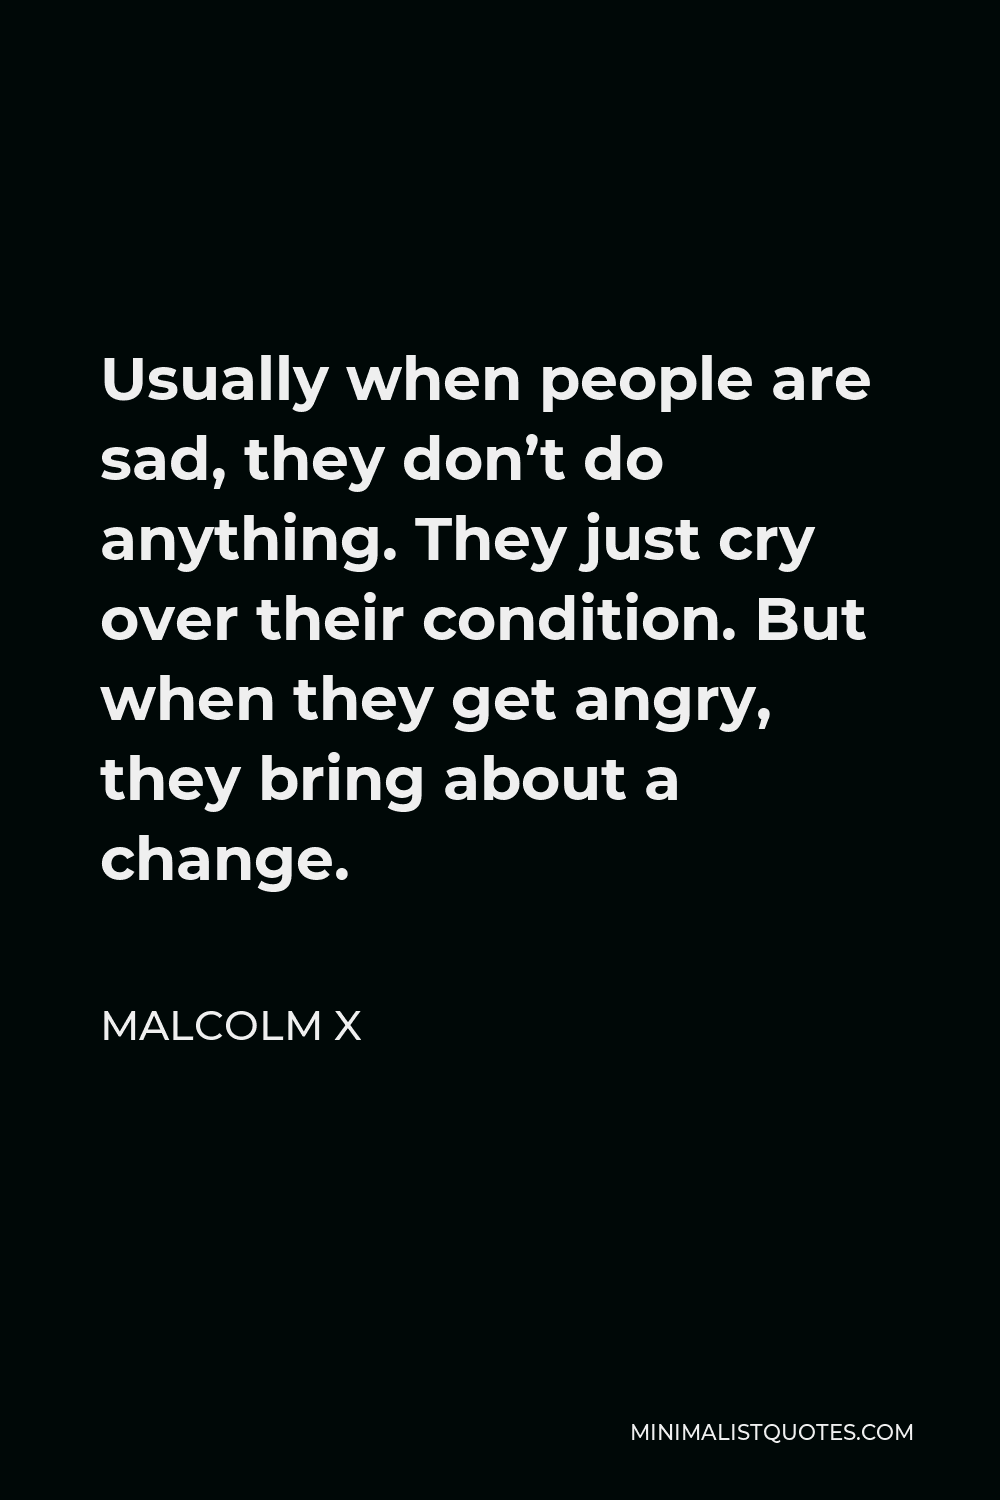 Malcolm X Quote - Usually when people are sad, they don’t do anything. They just cry over their condition. But when they get angry, they bring about a change.